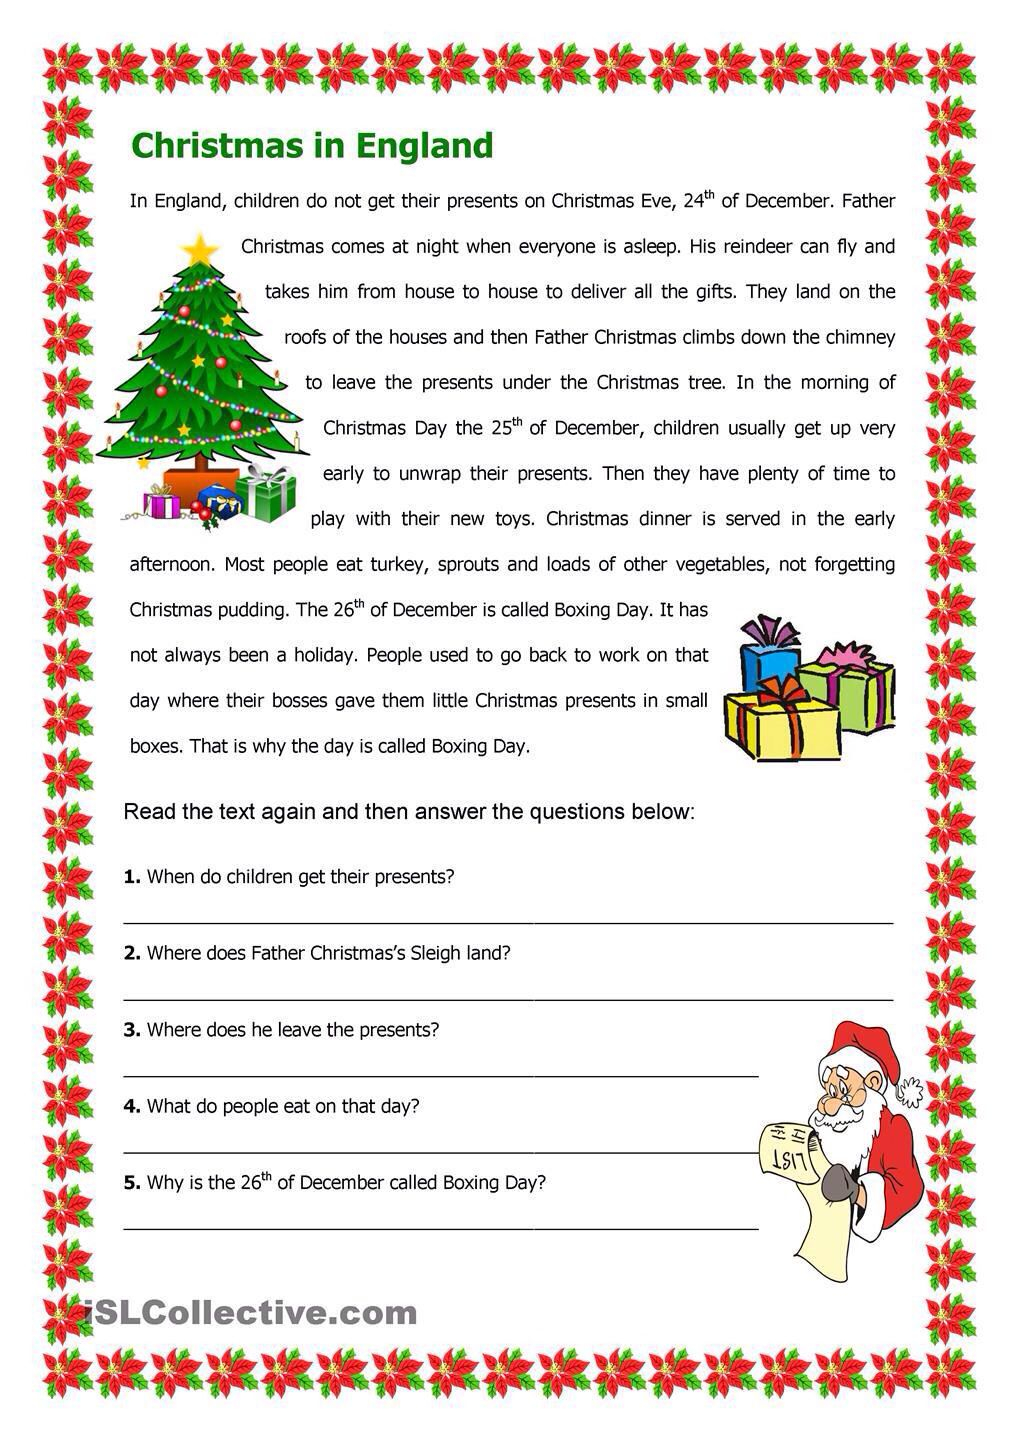 english-for-everyone-worksheets